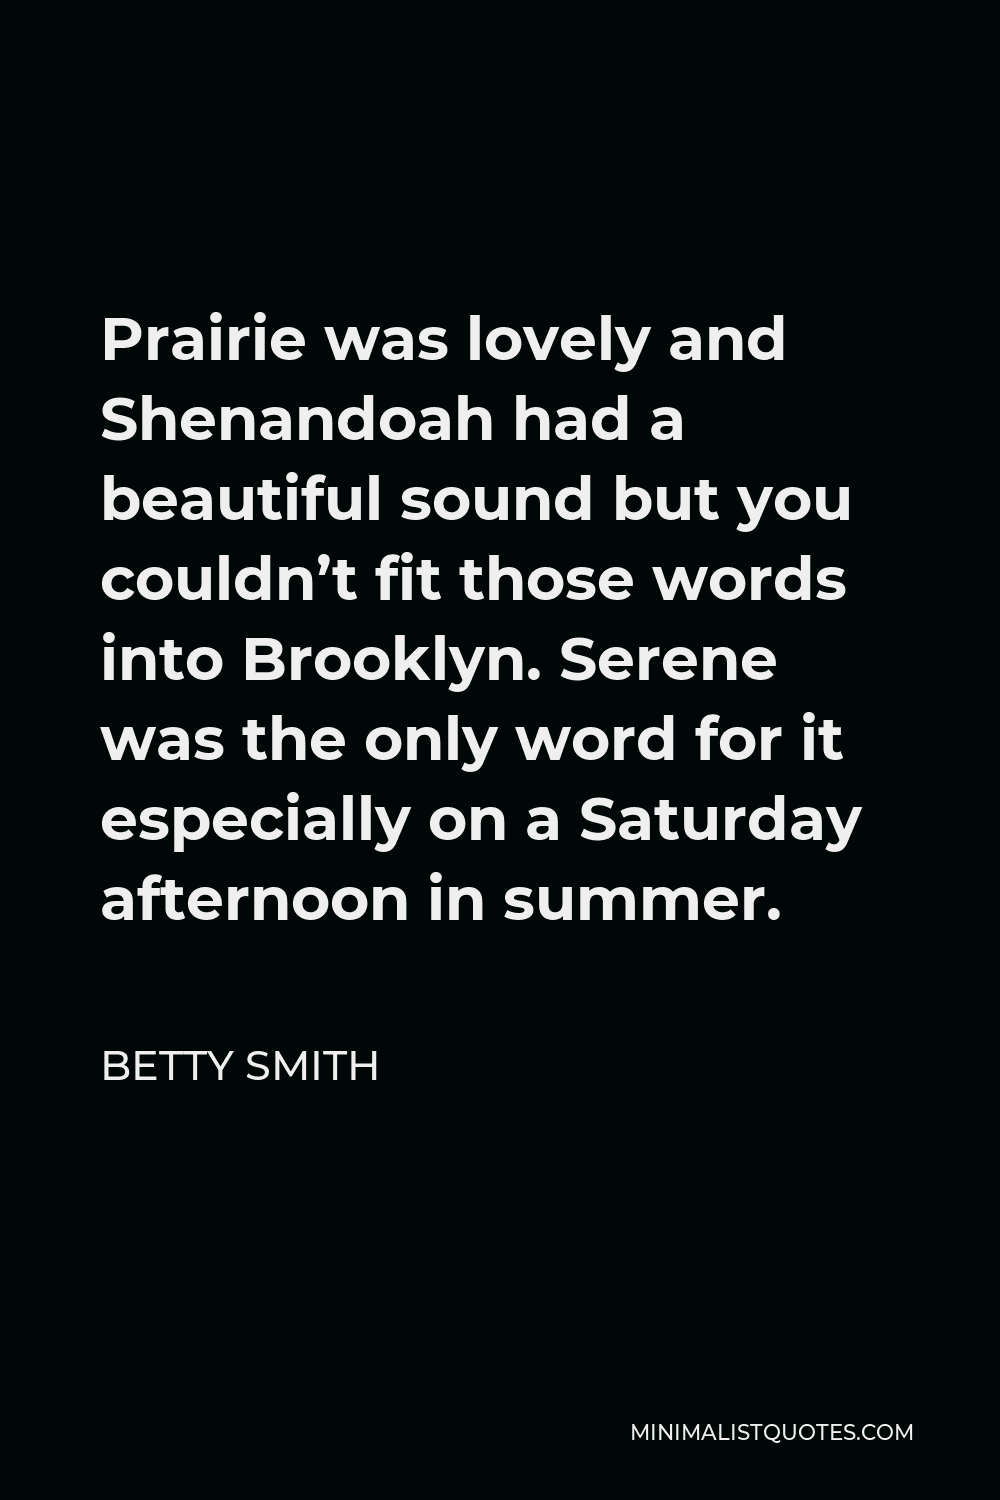 Betty Smith Quote - Prairie was lovely and Shenandoah had a beautiful sound but you couldn’t fit those words into Brooklyn. Serene was the only word for it especially on a Saturday afternoon in summer.